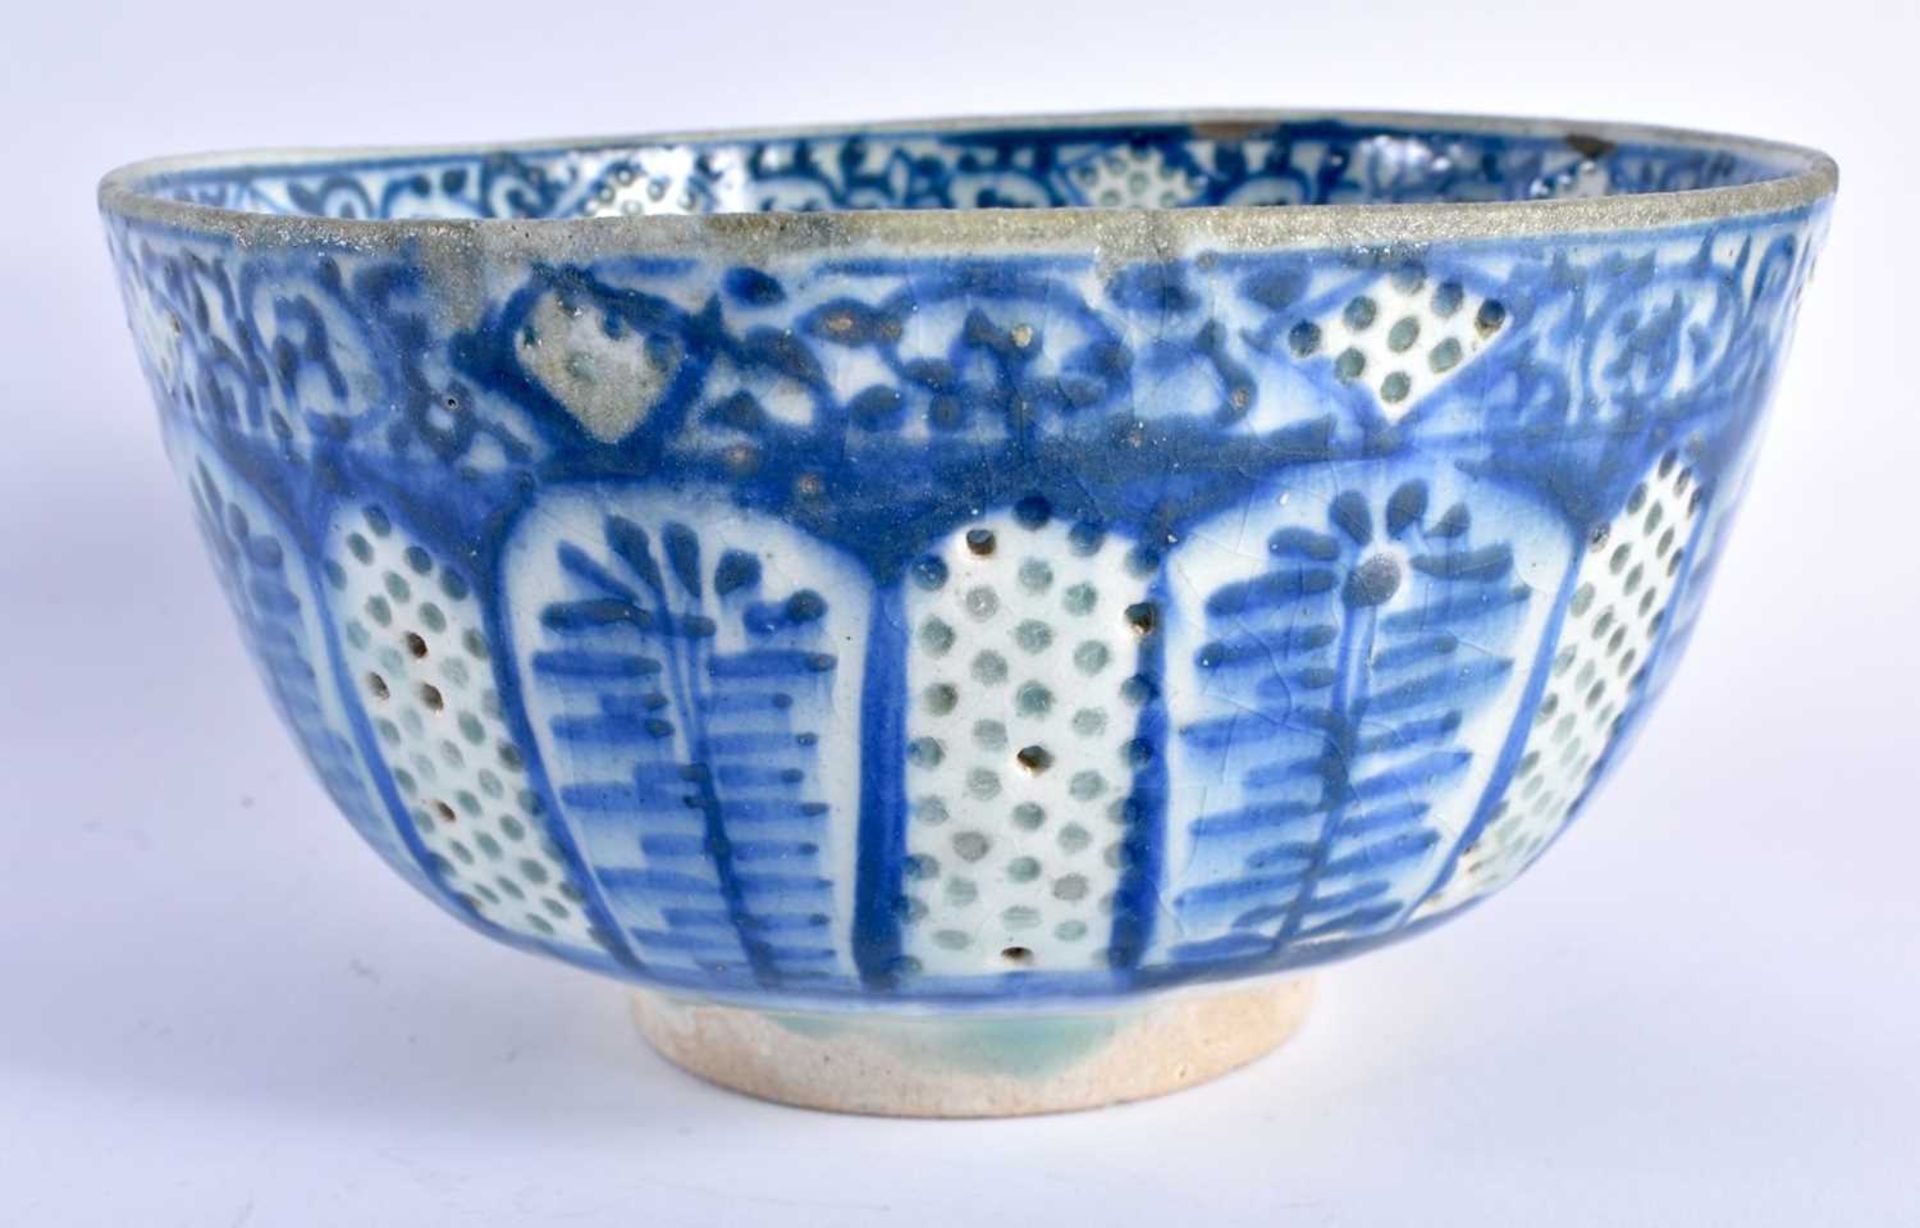 A 17TH/18TH CENTURY PERSIAN ISLAMIC BLUE AND WHITE POTTERY SAFAVID BOWL. 17 cm x 10 cm.